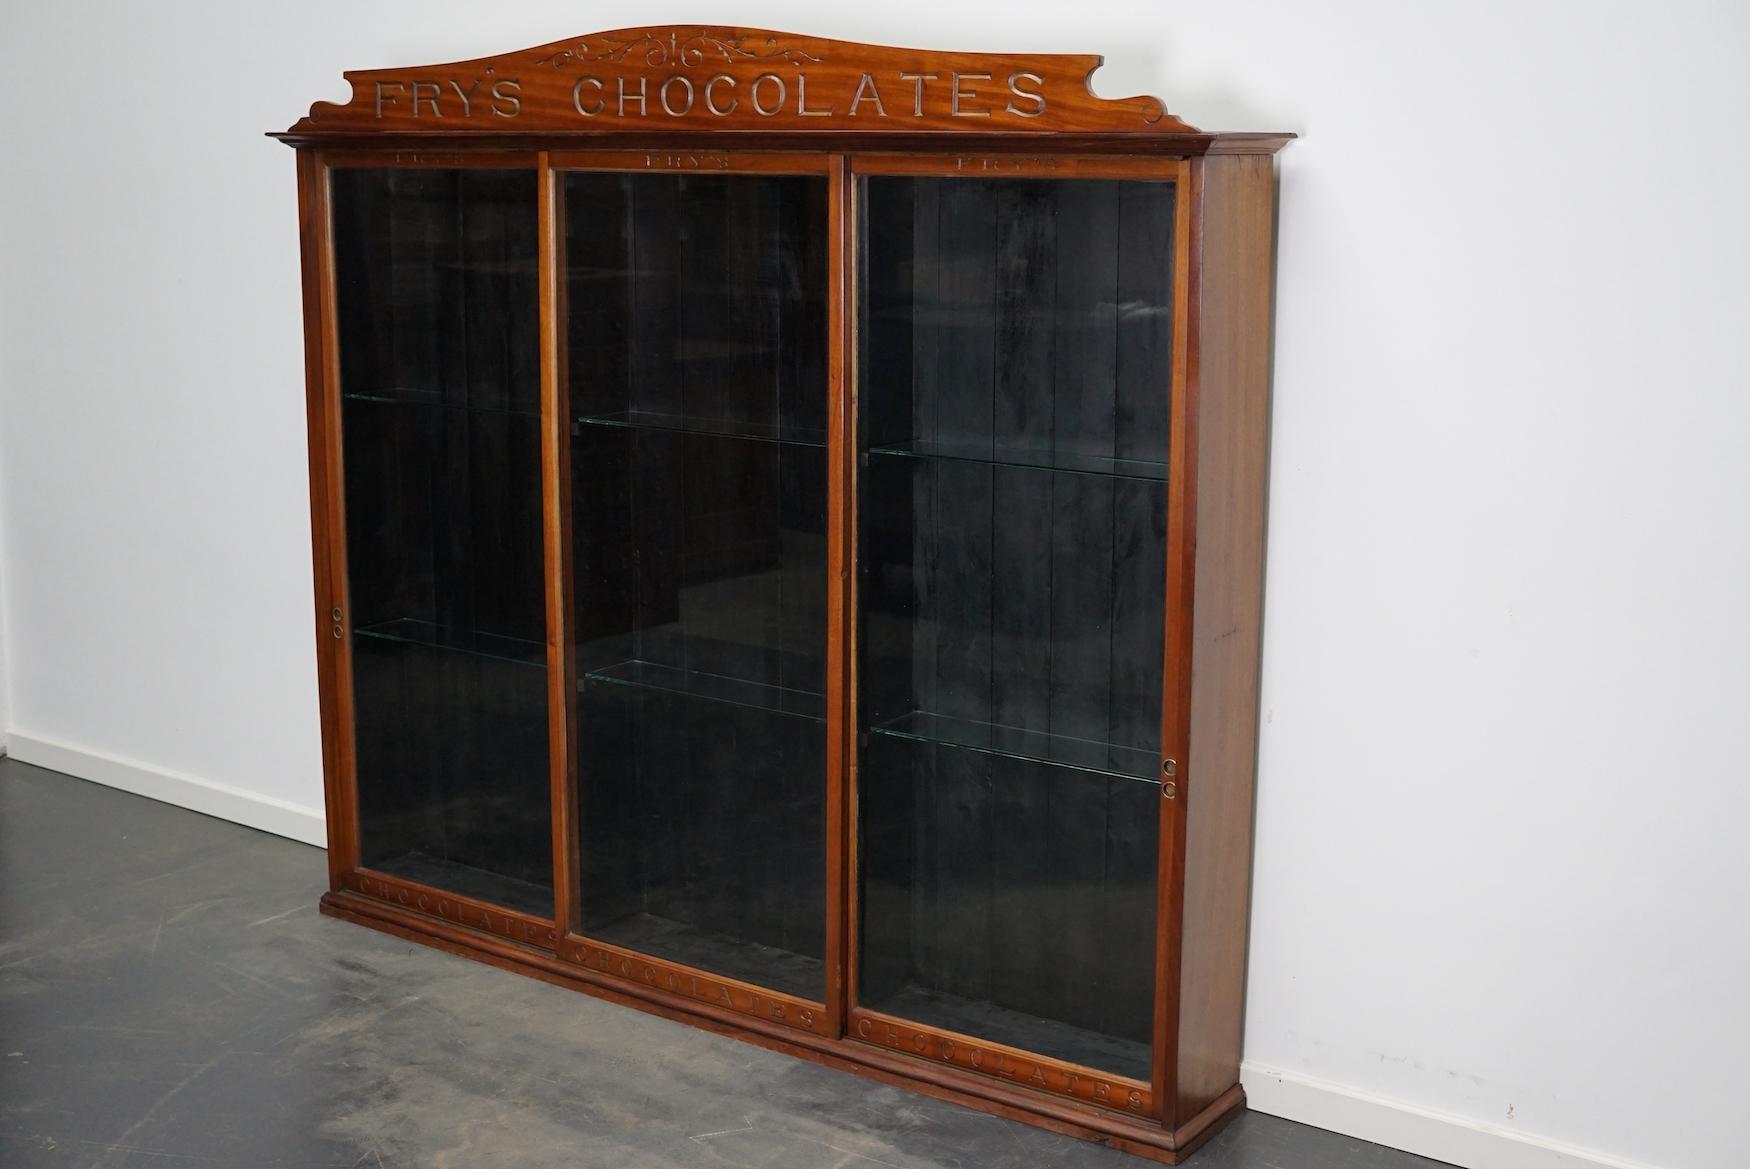 A very special Victorian mahogany display cabinet made for Fry's Chocolates. This outstanding large cabinet has three glass doors and six glass shelves.